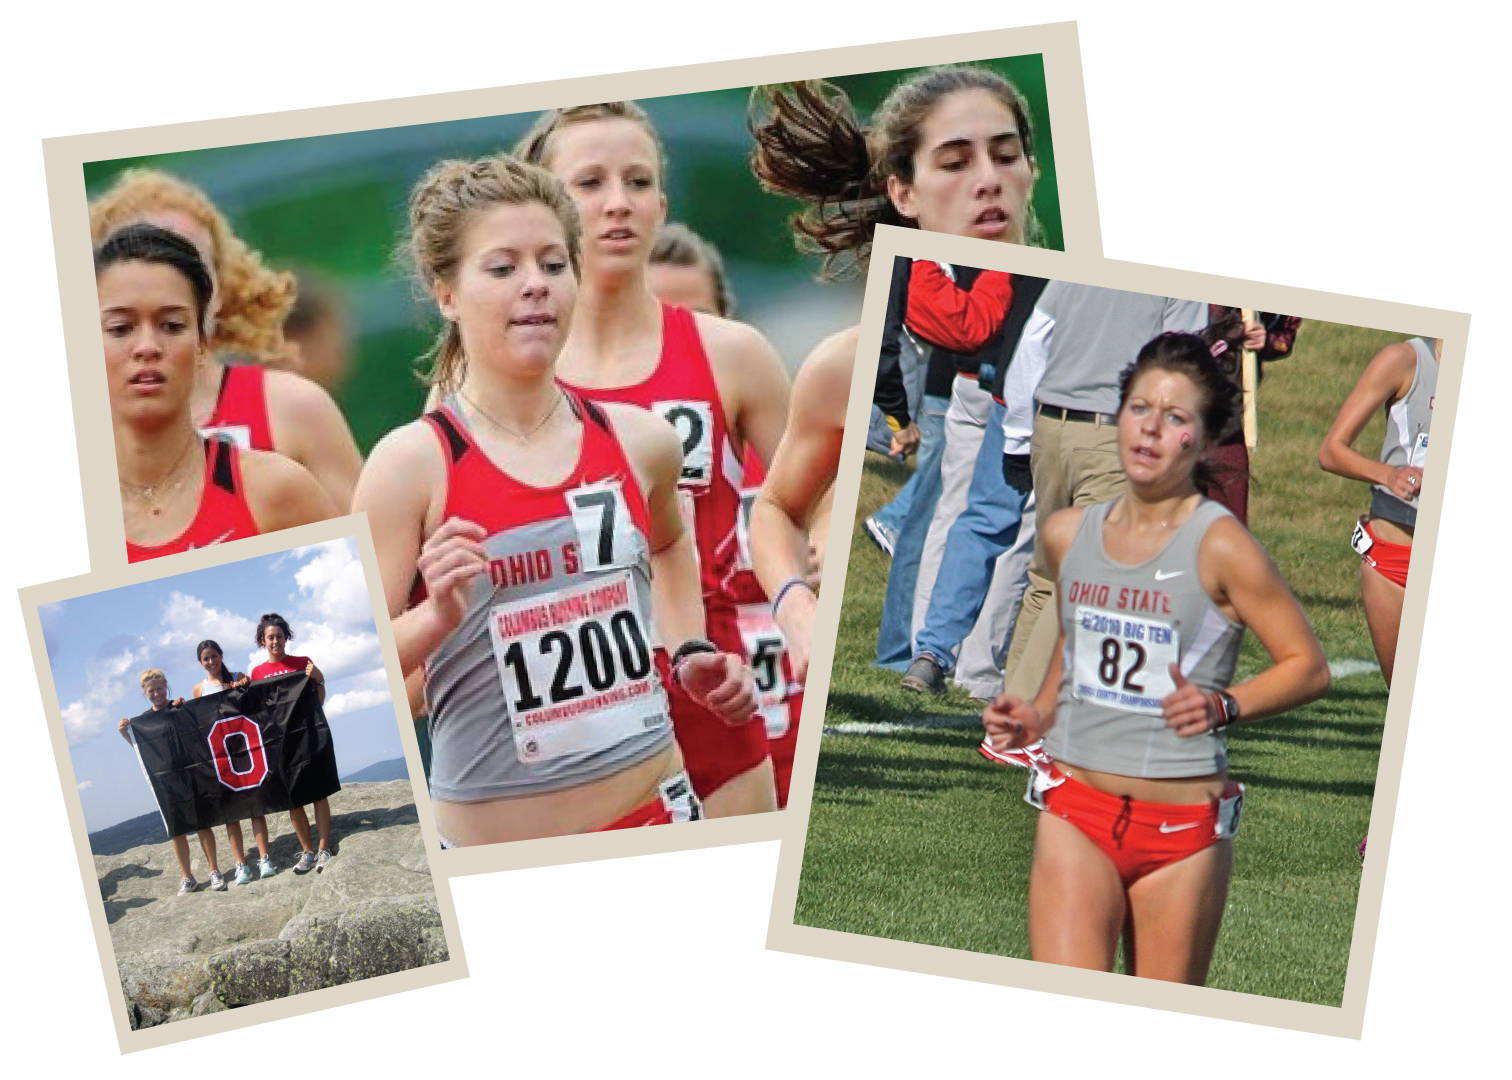 Molly Bookmyer representing Ohio State in college cross country competition